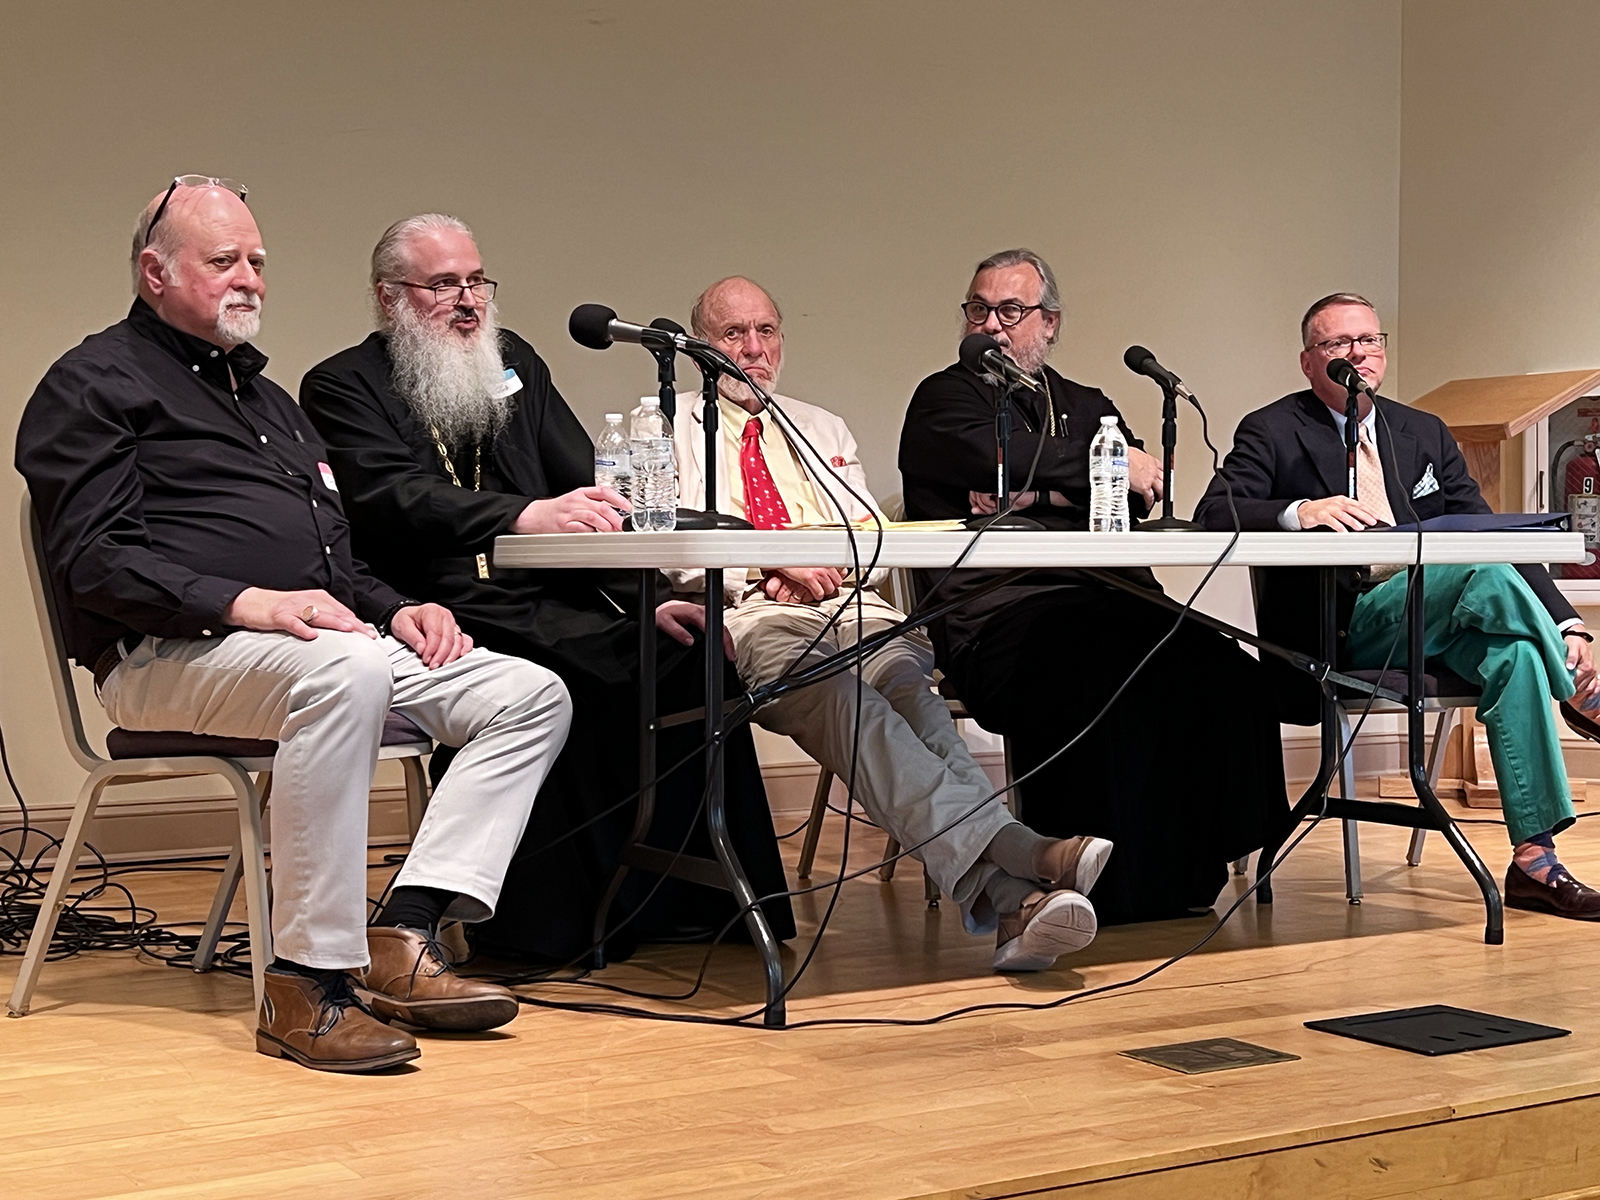 George Michalopulos, from left, the Rev. John Whiteford, Don Livingston, the Rev. Mark Mancuso and Clark Carlton were all presenters during the Philip Ludwell III Orthodox Fellowship inaugural conference in Tobaccoville, North Carolina. Photo by Meagan Saliashvili